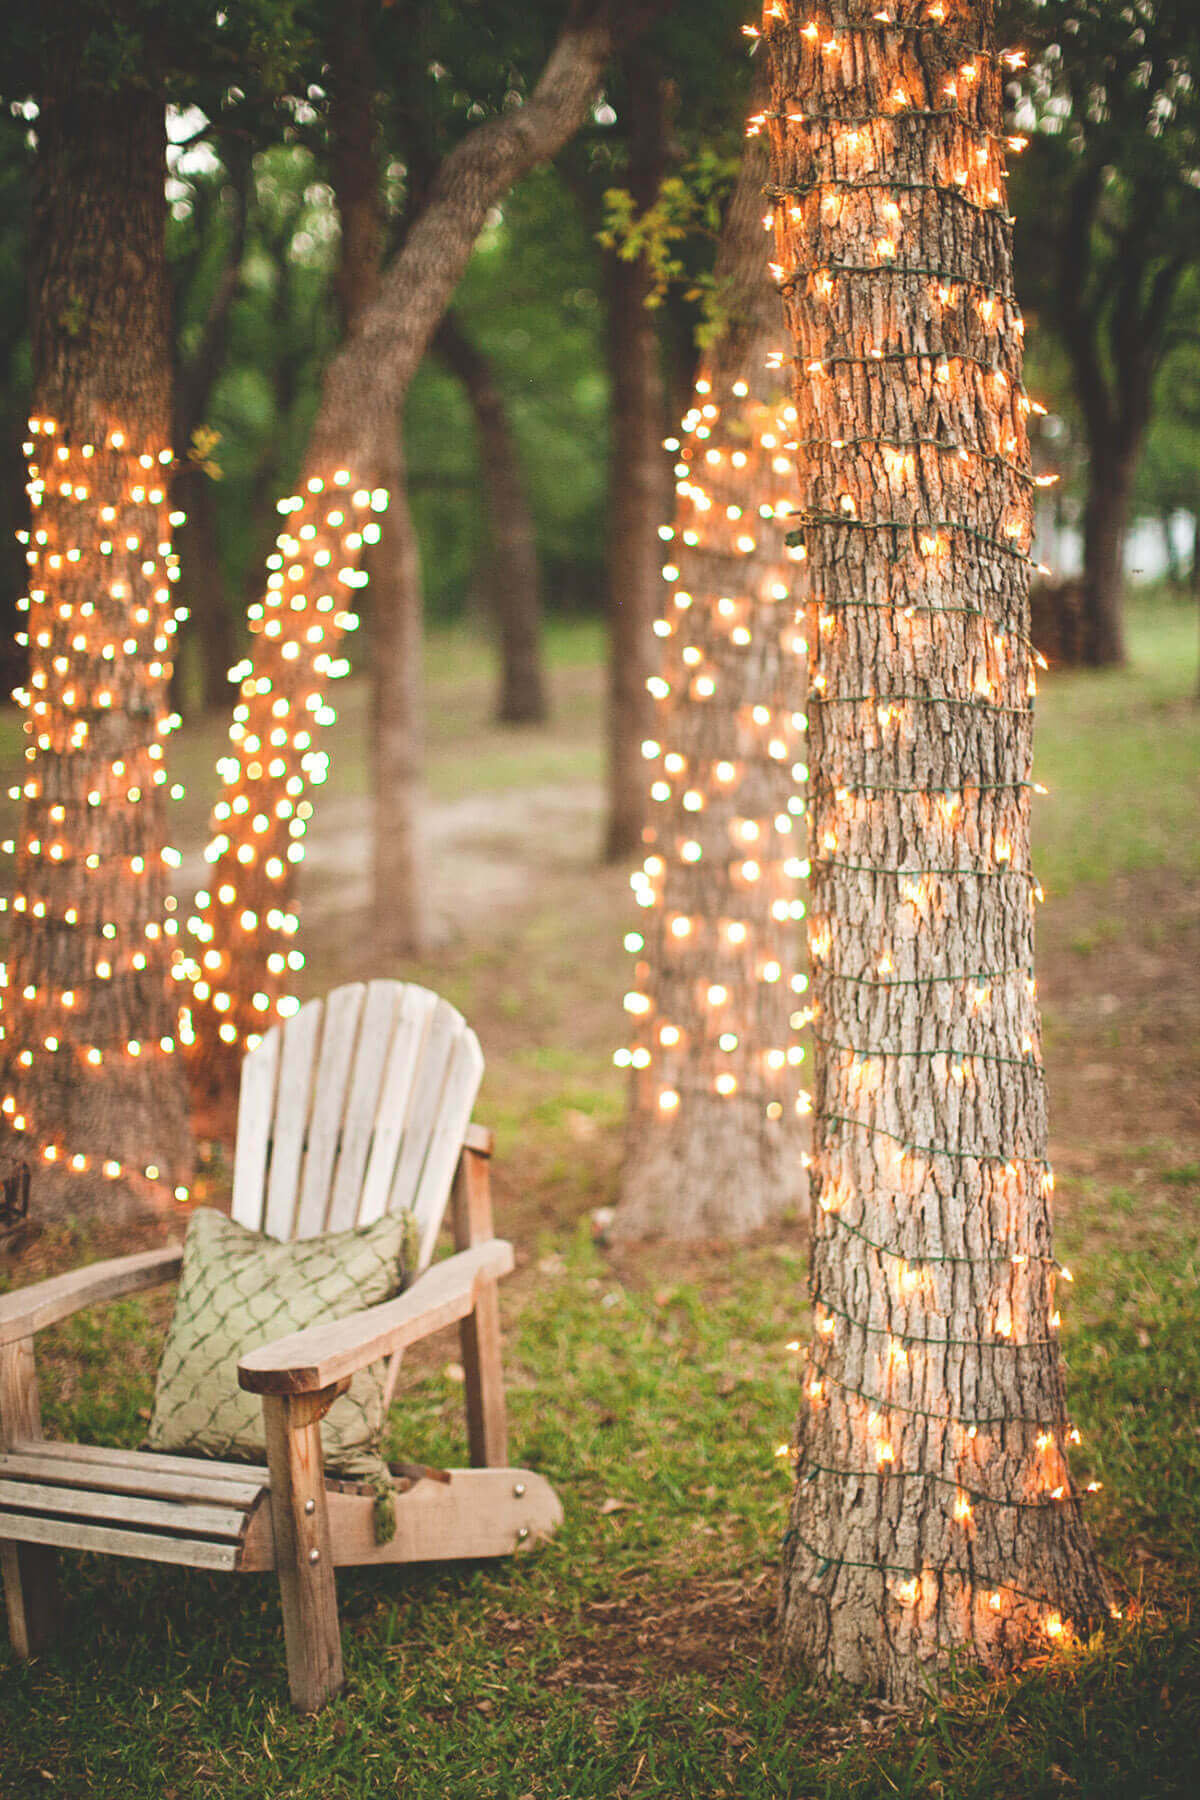 Tree Trunks Wrapped in String Lights